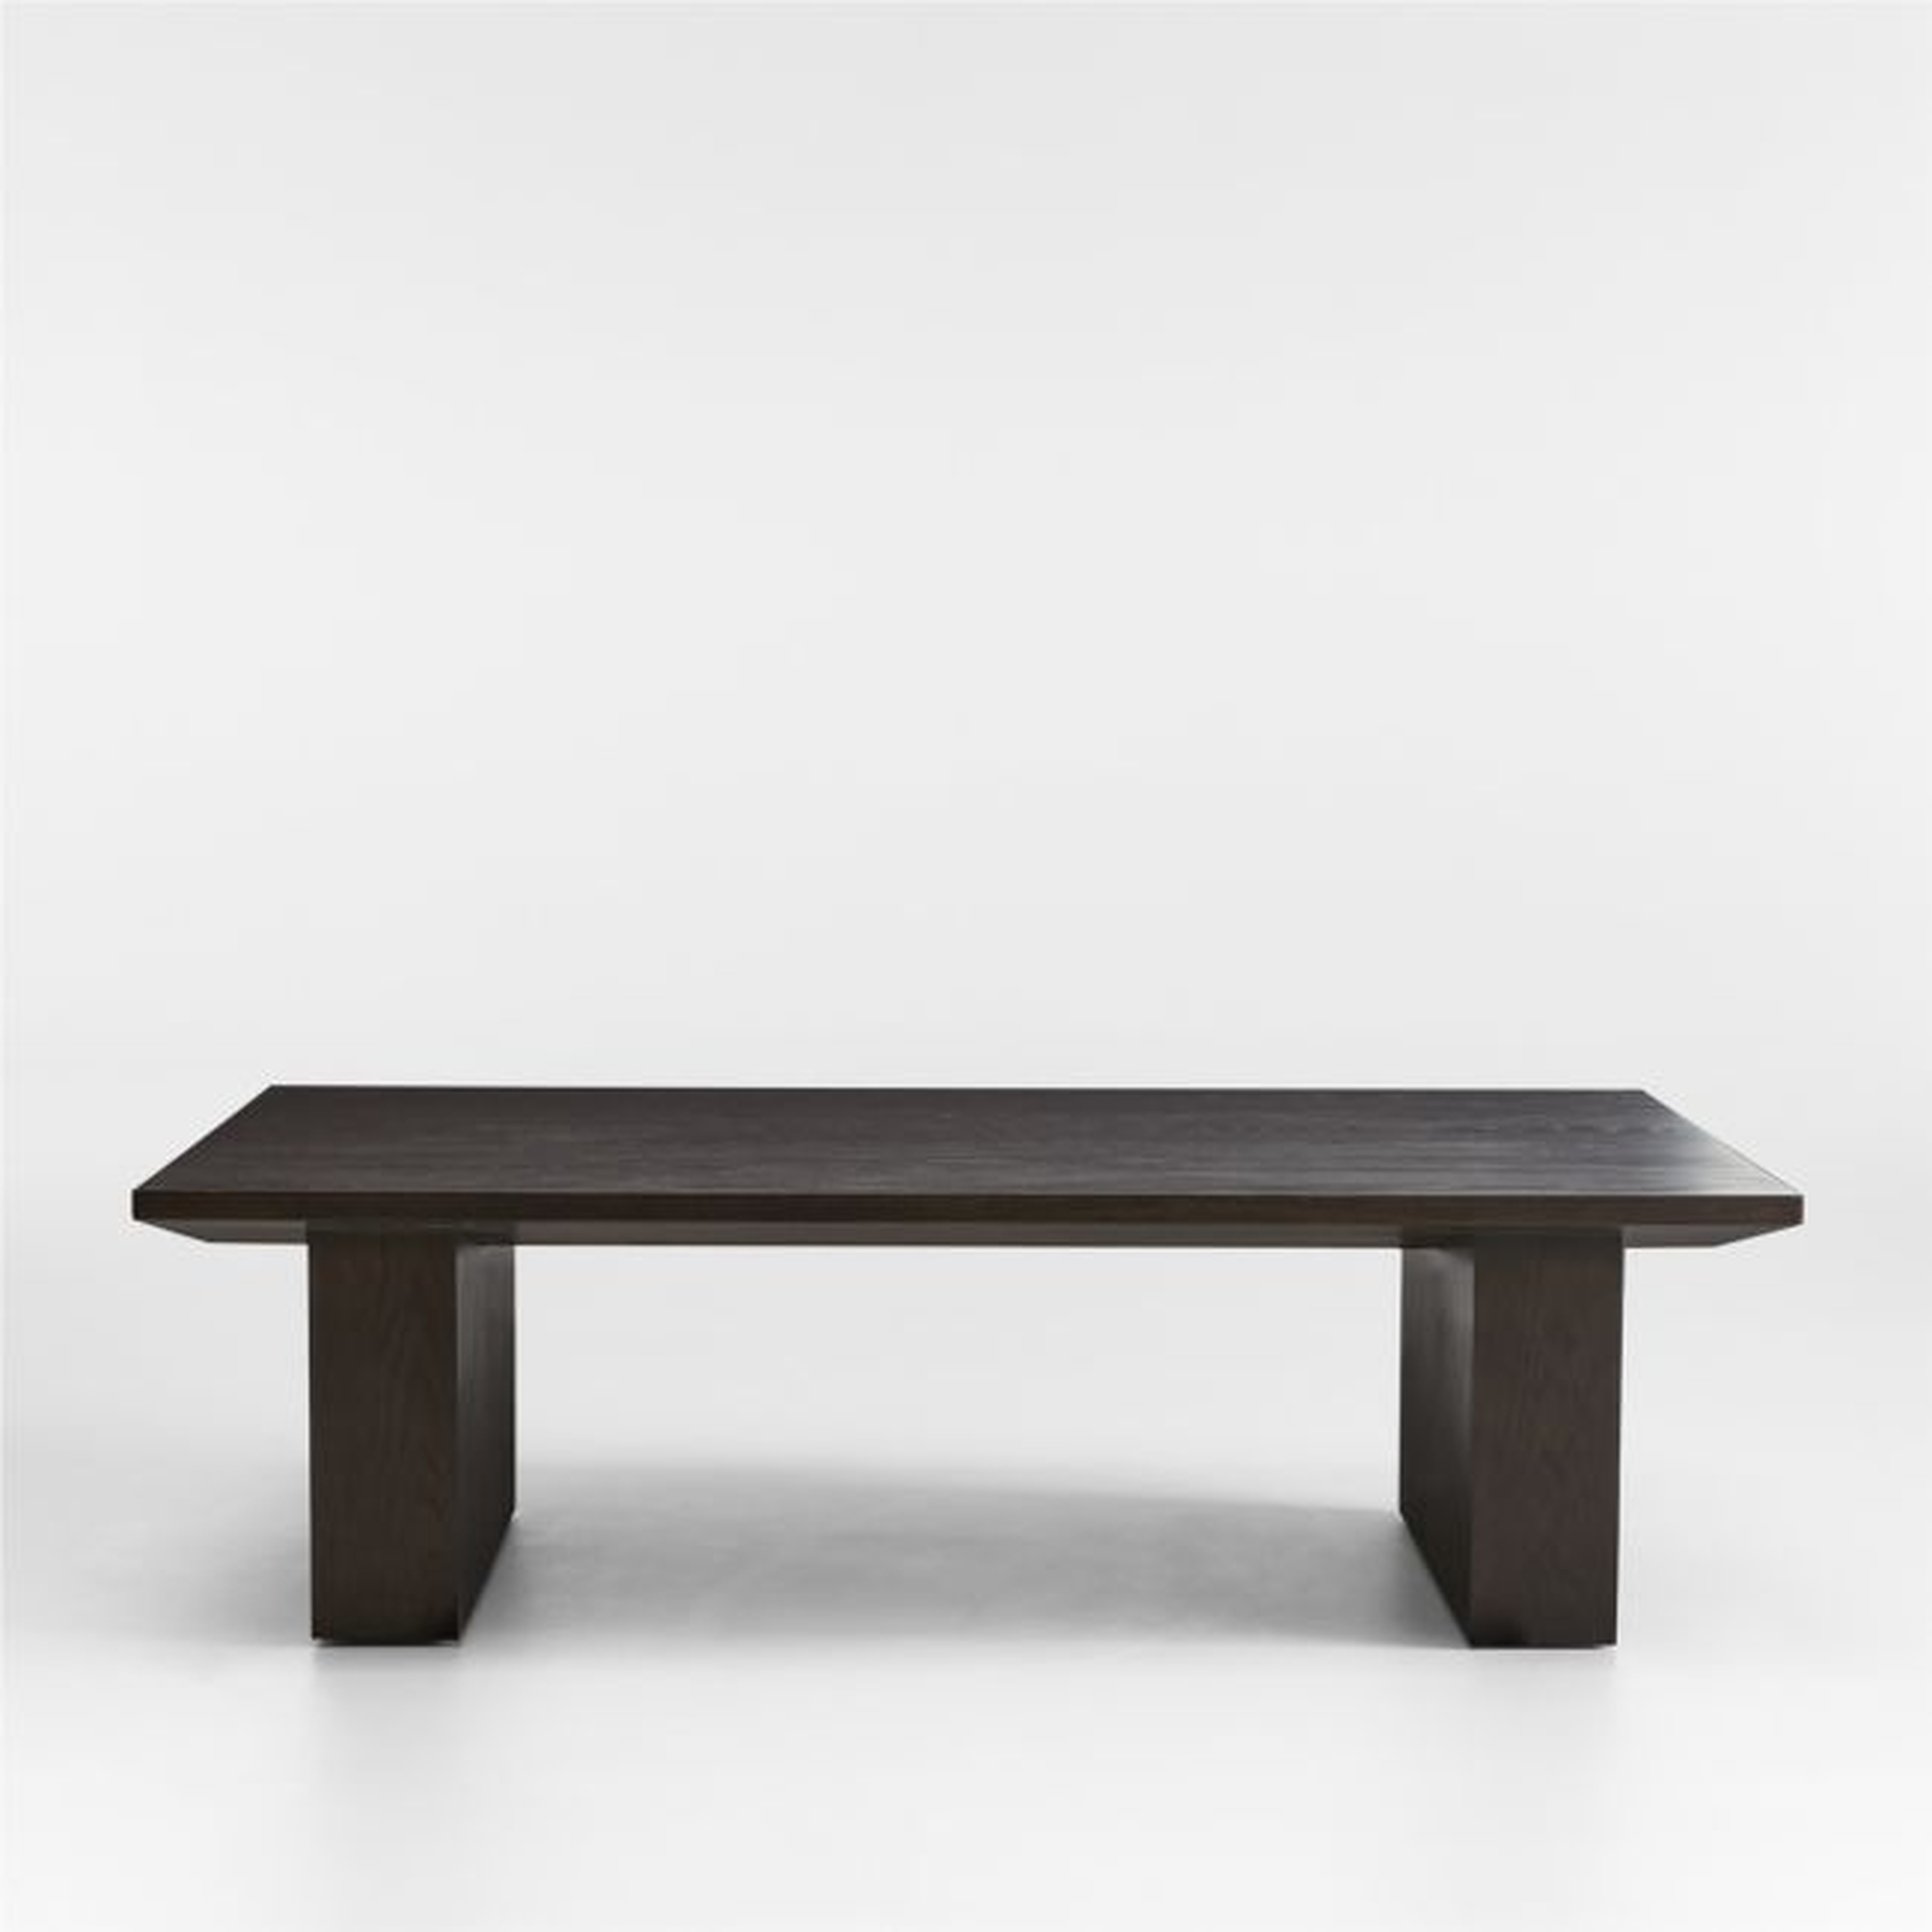 Van Charcoal Brown Wood Coffee Table by Leanne Ford - Crate and Barrel